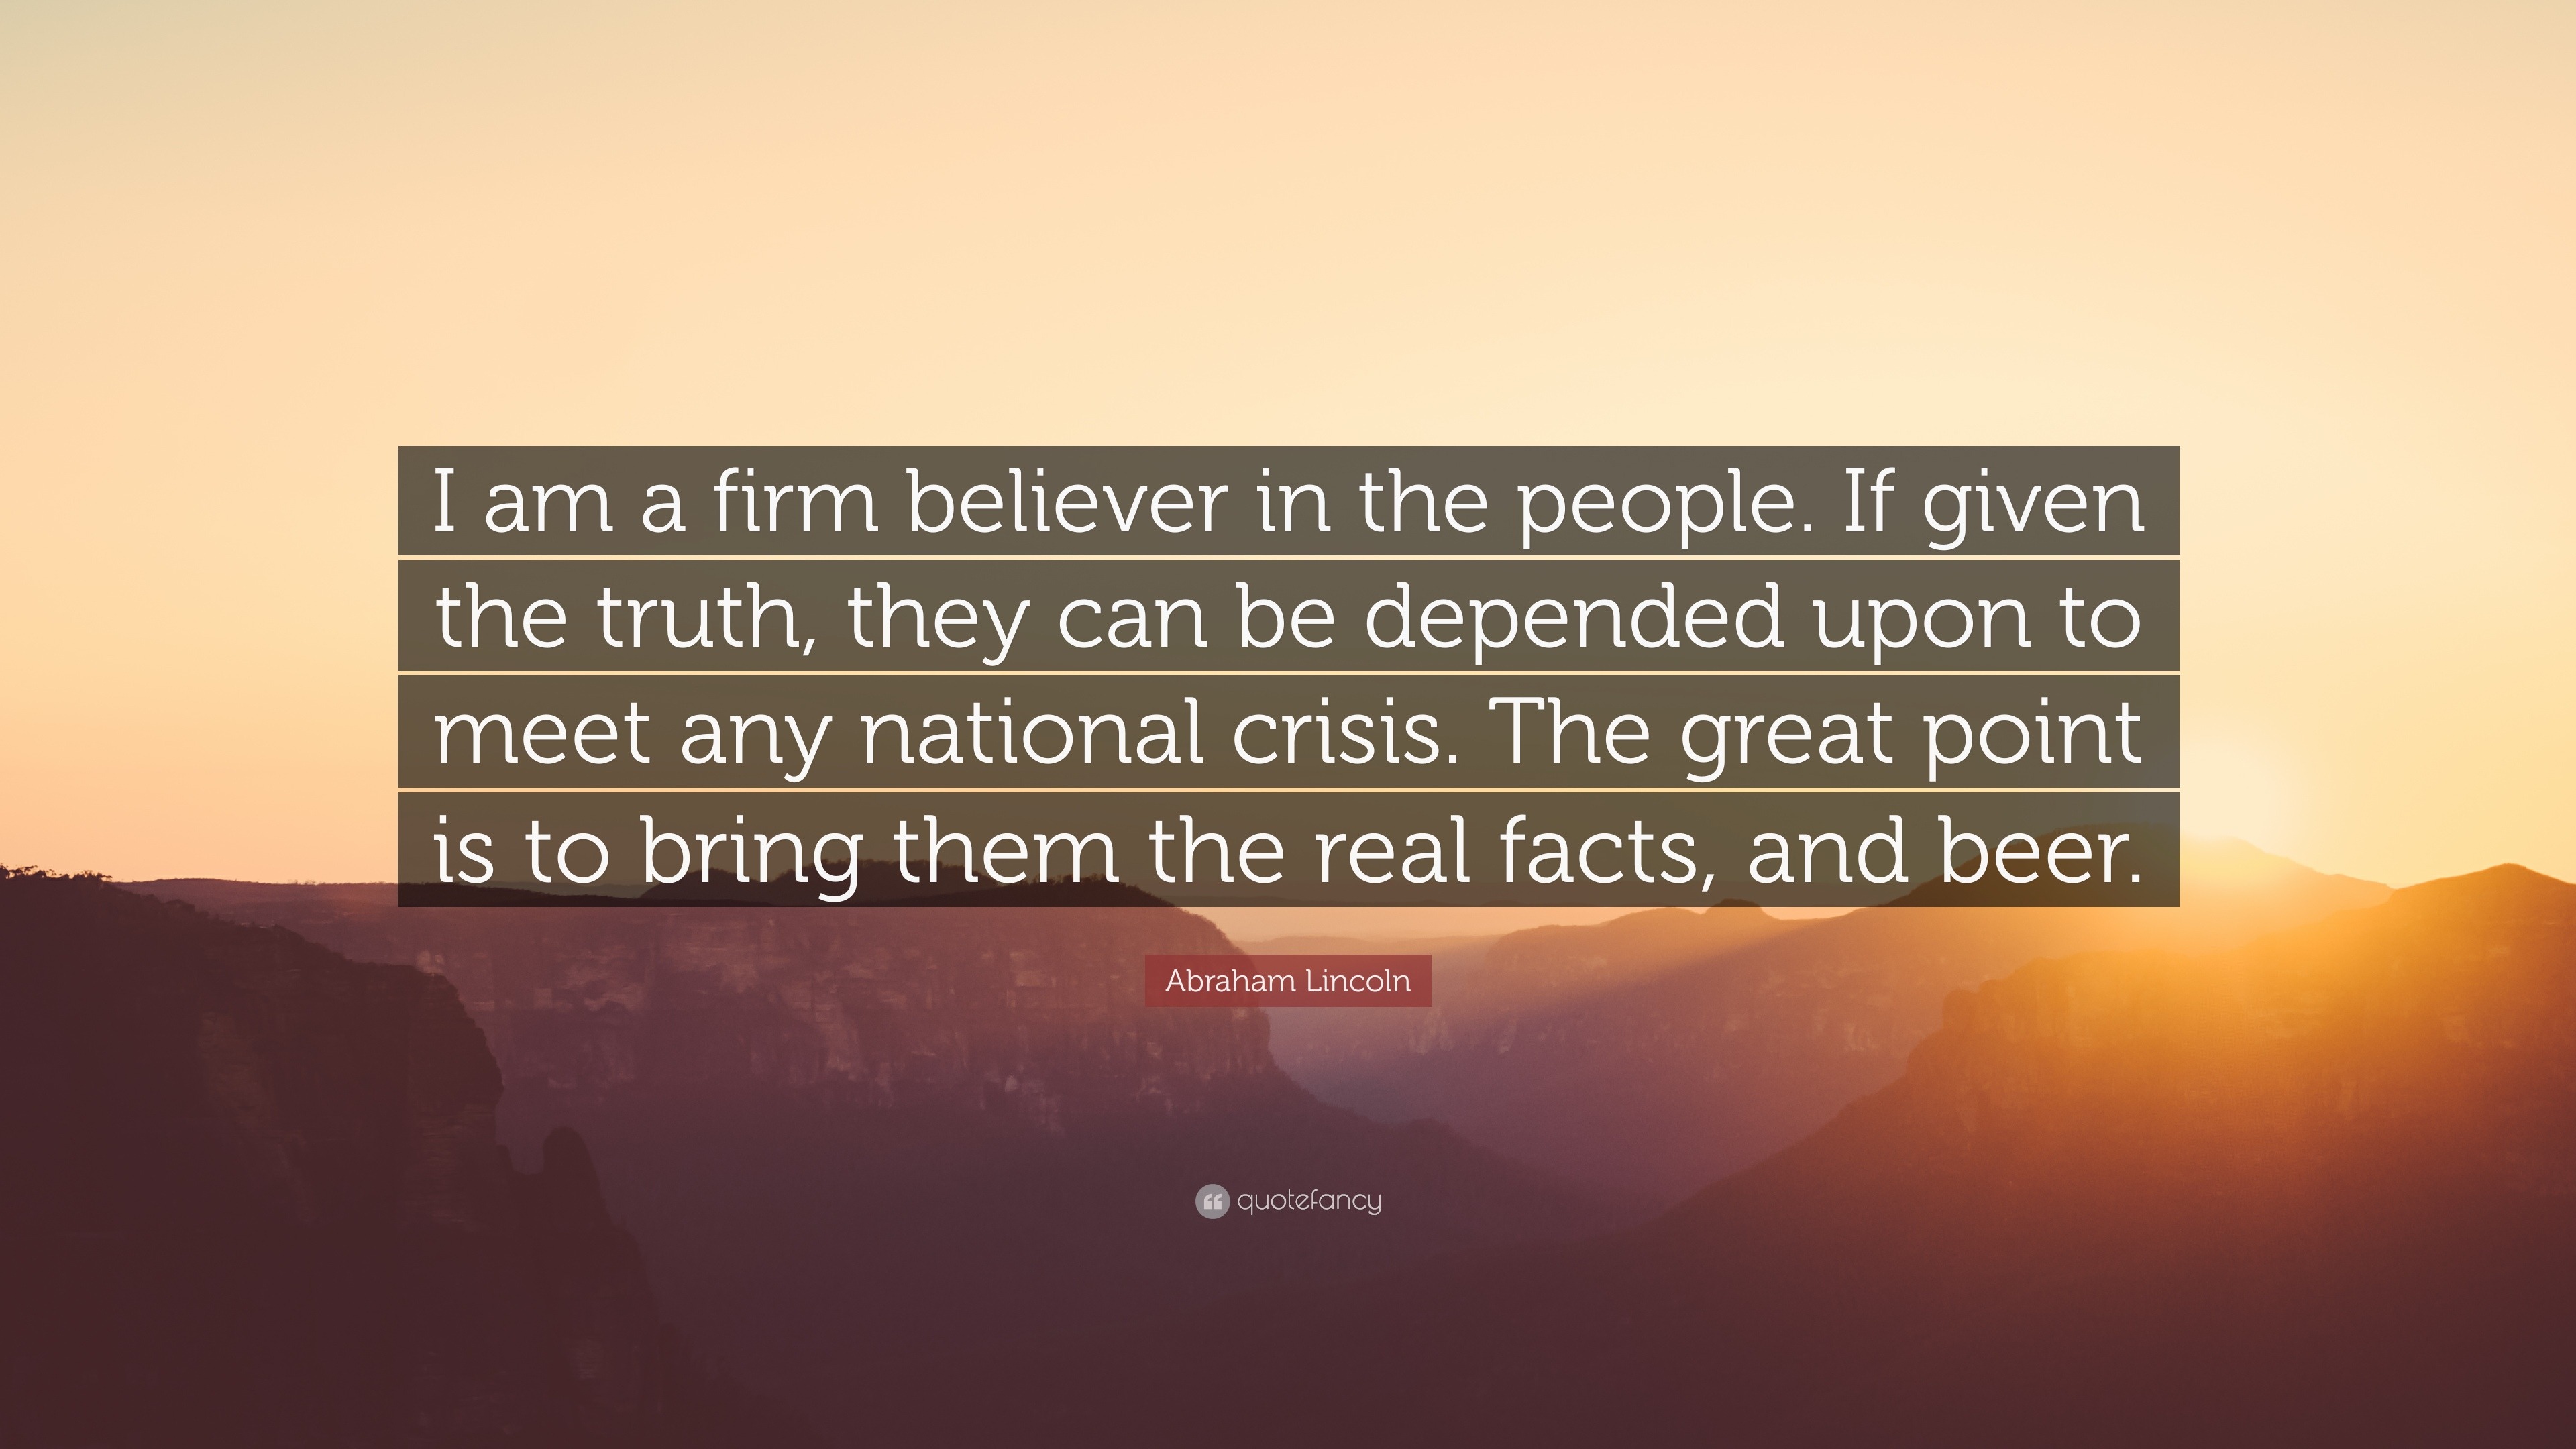 Abraham Lincoln Quote I Am A Firm Believer In The People If Given The Truth They Can Be Depended Upon To Meet Any National Crisis The Great